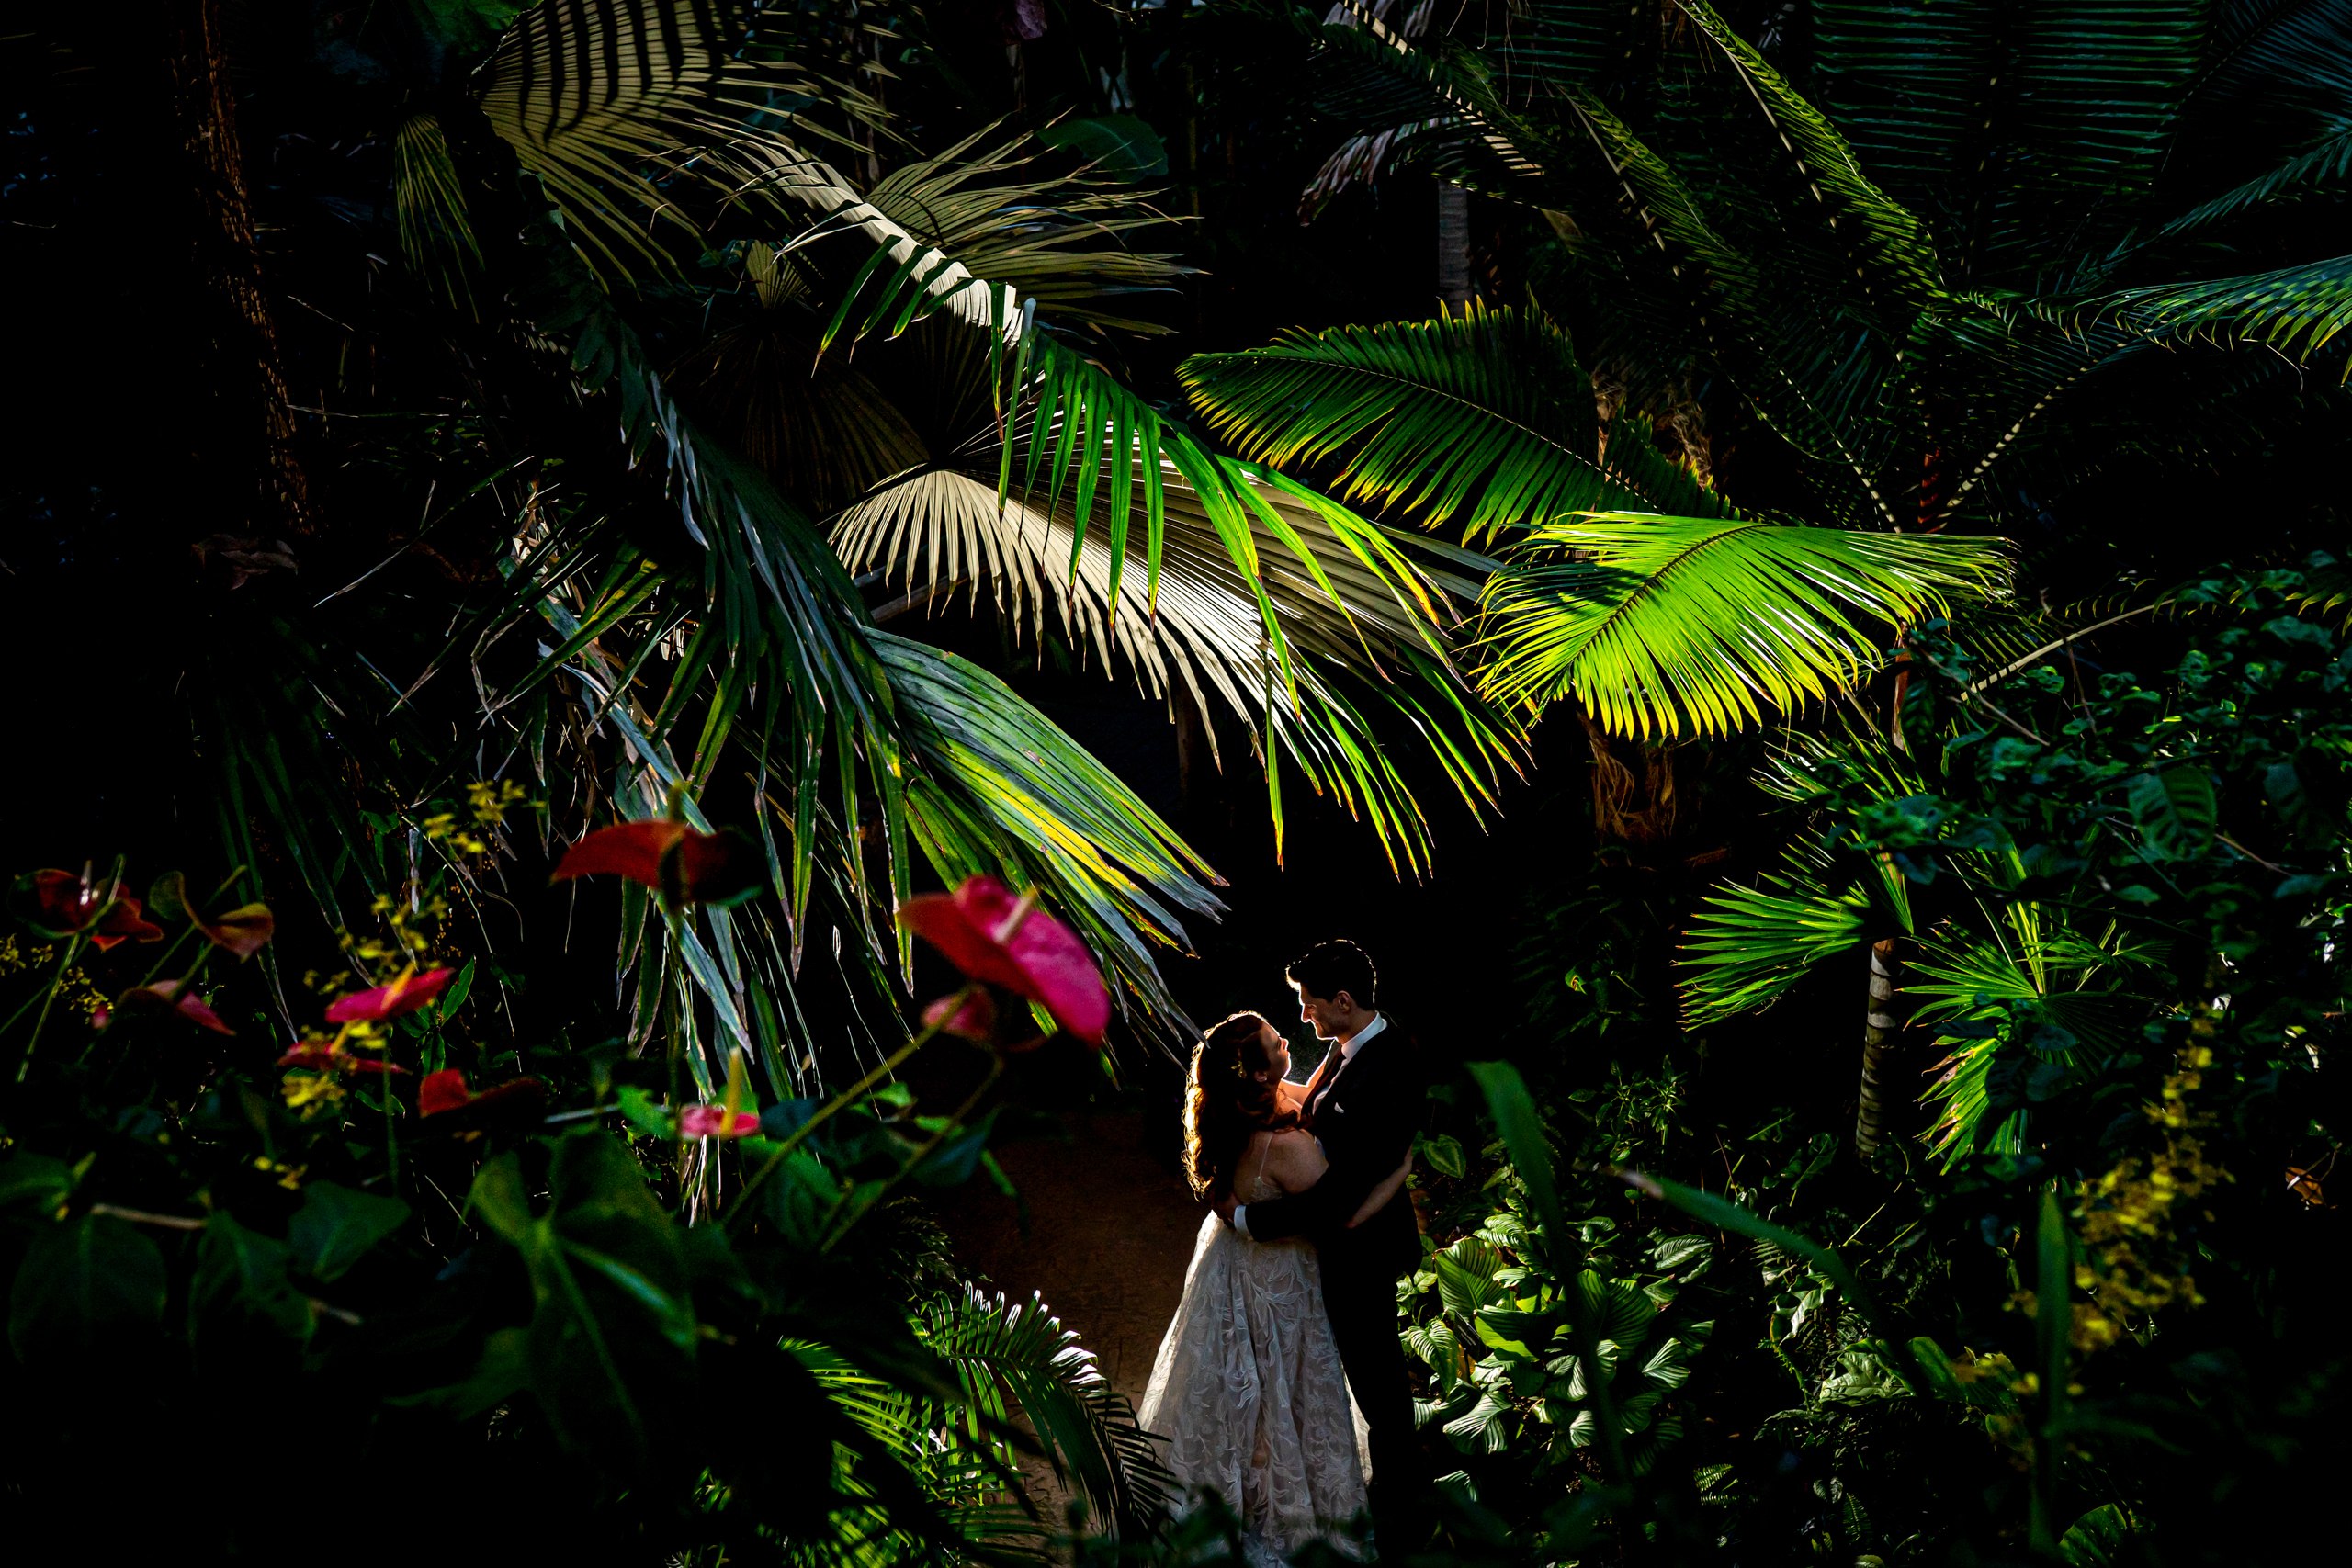 Bride and groom pose for a backlit portrait surrounded by tropical plants that are illuminated, wedding photos, wedding photography, wedding photographer, wedding photo inspiration, Denver Botanic Garden wedding, Denver Botanic Garden wedding photos, Denver Botanic Garden wedding photography, Denver Botanic Garden wedding inspiration, Denver wedding venue, Denver wedding photos, Denver wedding photography, Denver wedding photographer, Colorado wedding photography